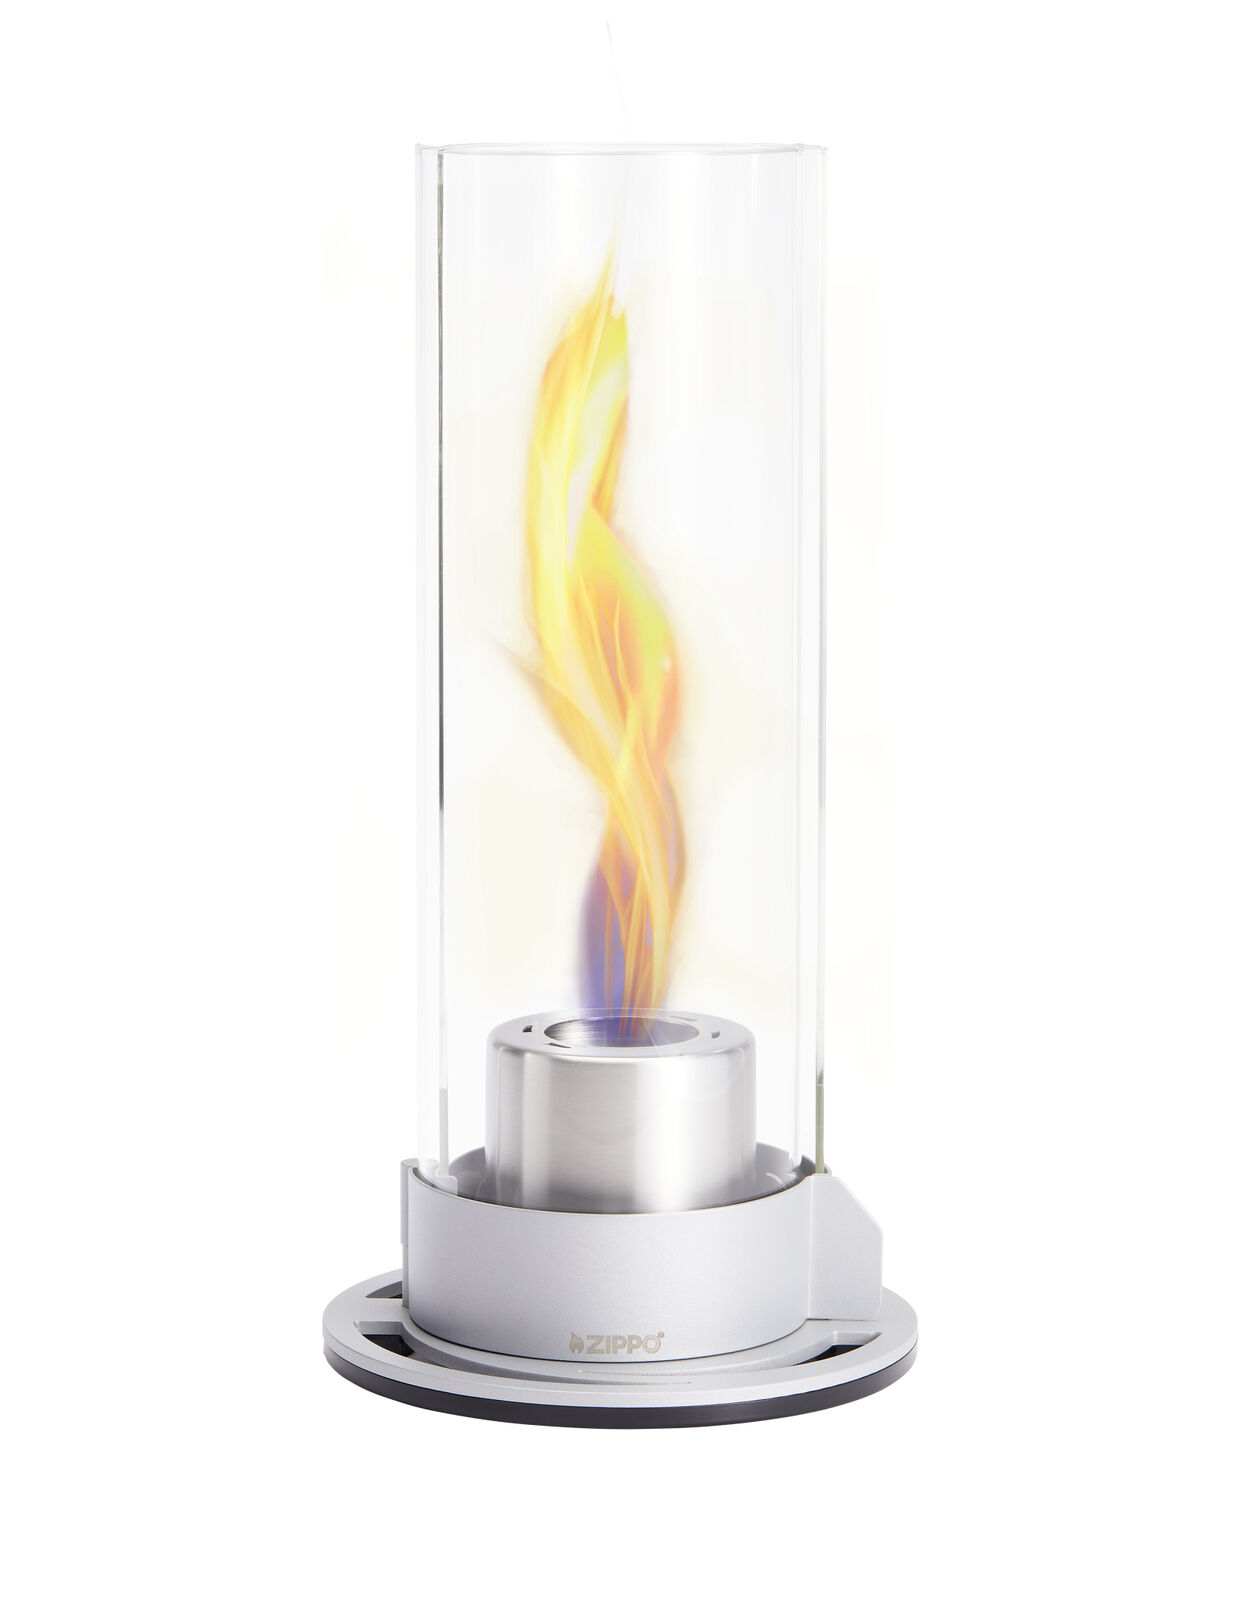 Zippo FlameScapes™ Spiral Fire Feature XL, 60044F-US (With Gel Fuel)